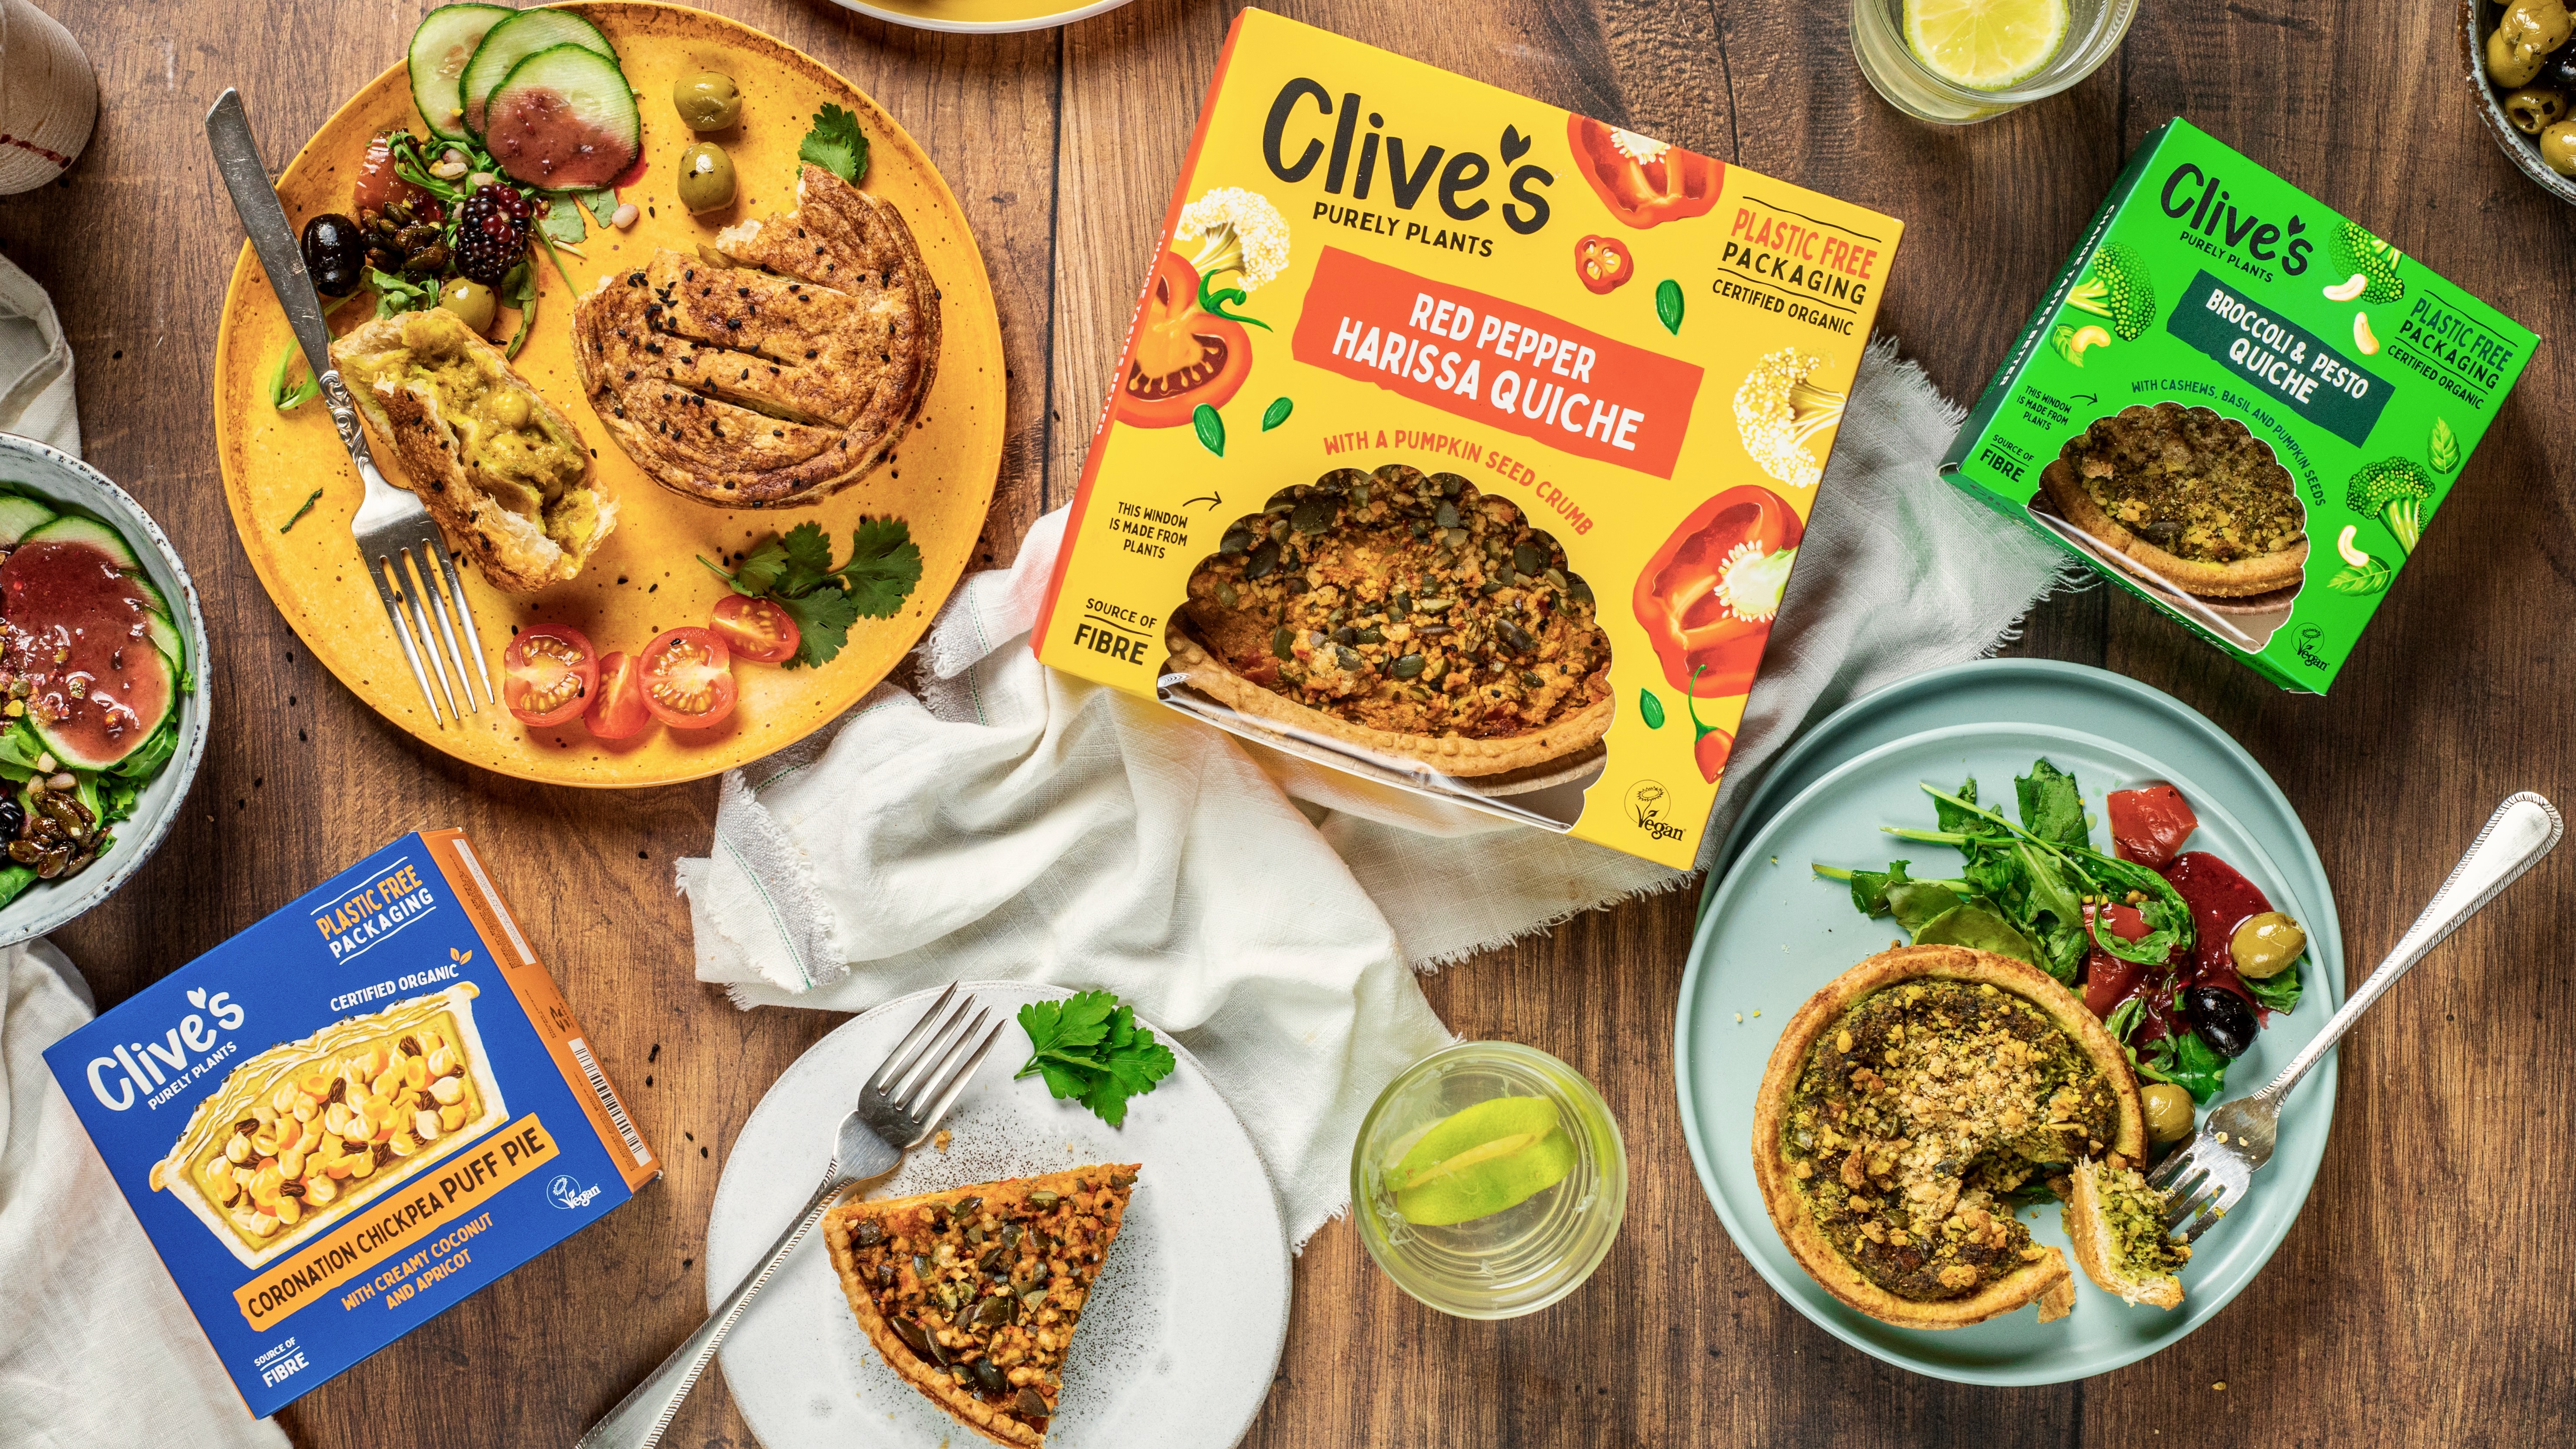 Clive’s Pies delivers new plant-based quiches and pies